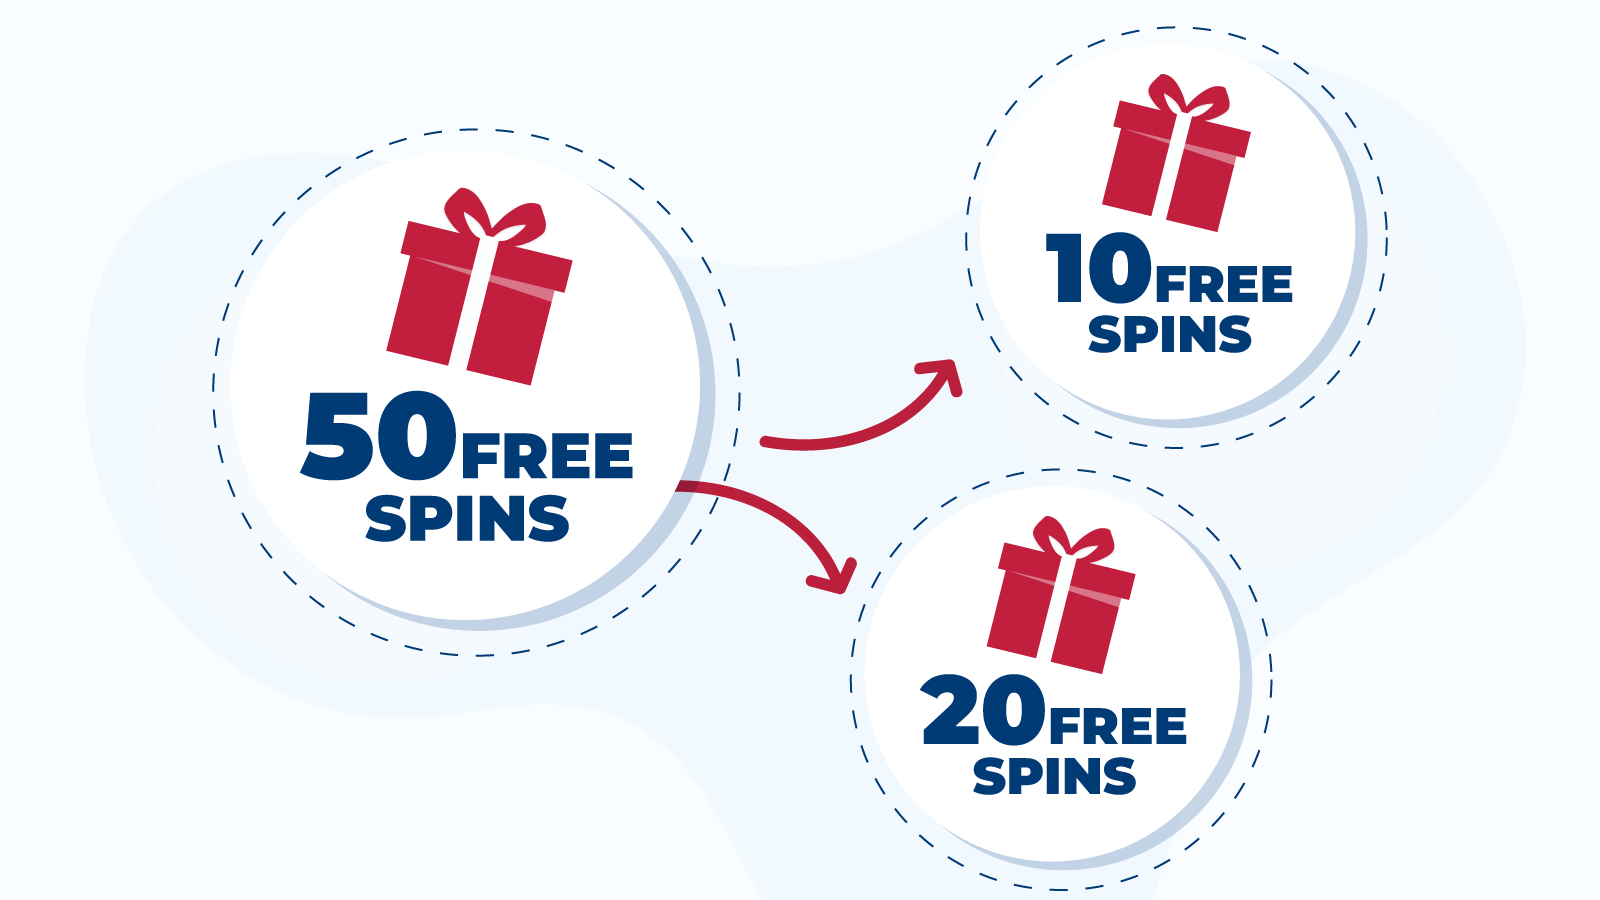 Other Free Spins Options